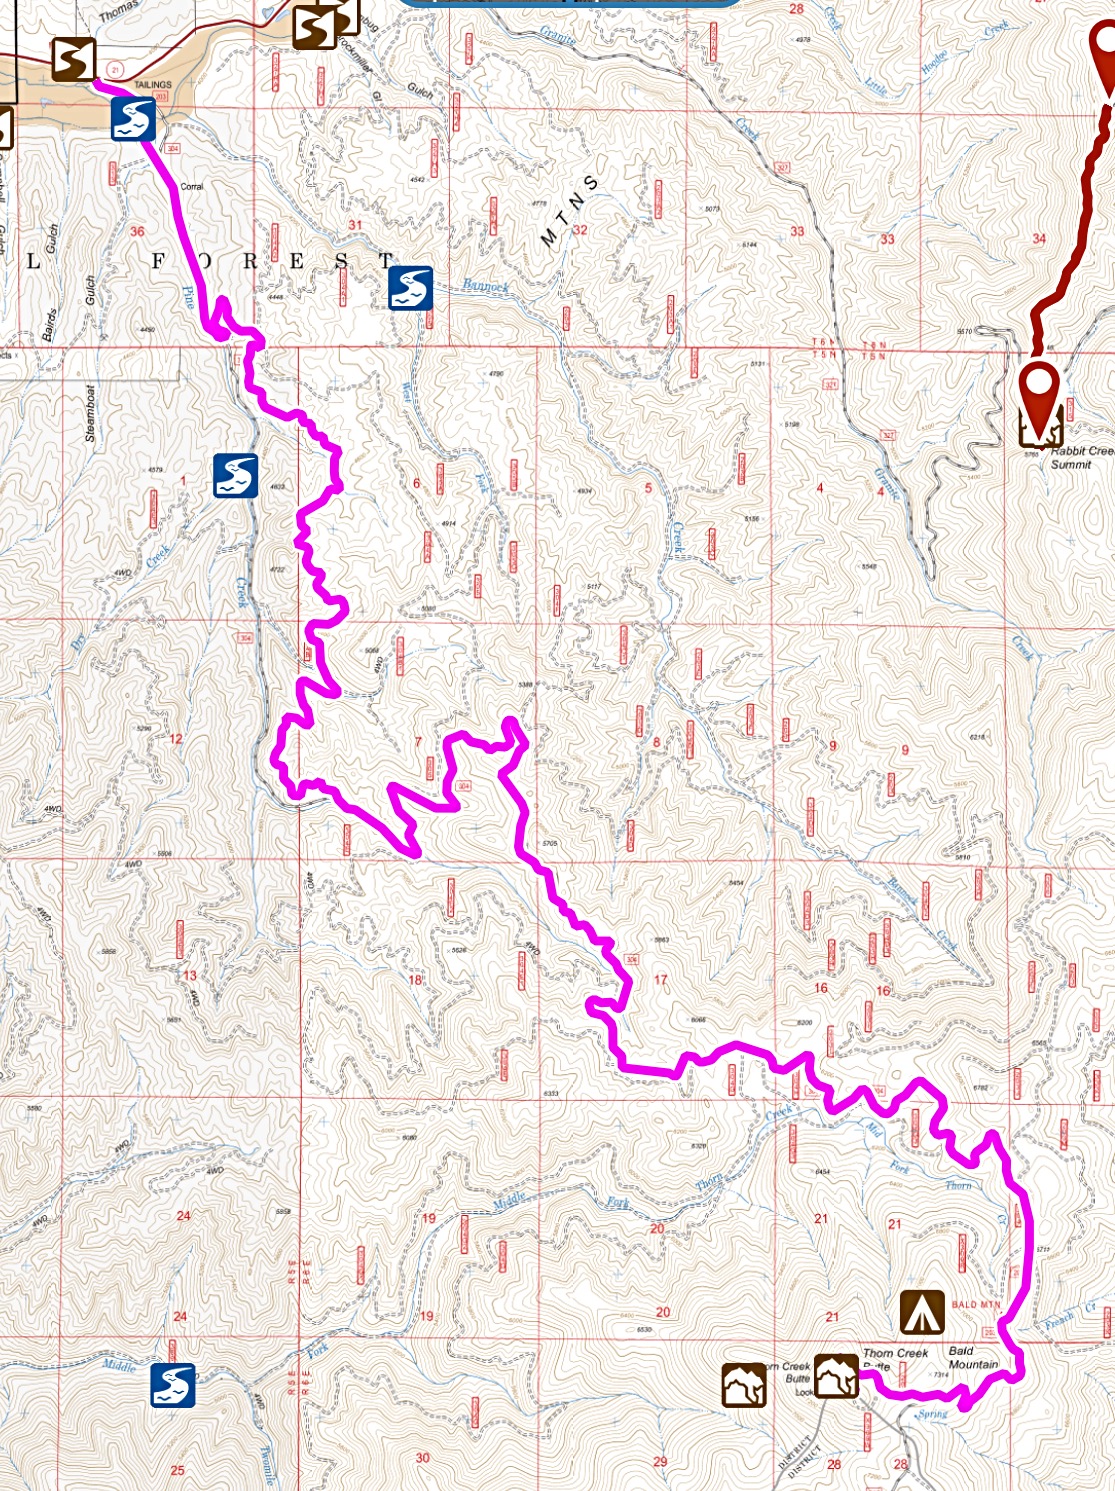 My GPS track for FS-304/203. Stats: 14.3 with 3,315 of elevation gain.